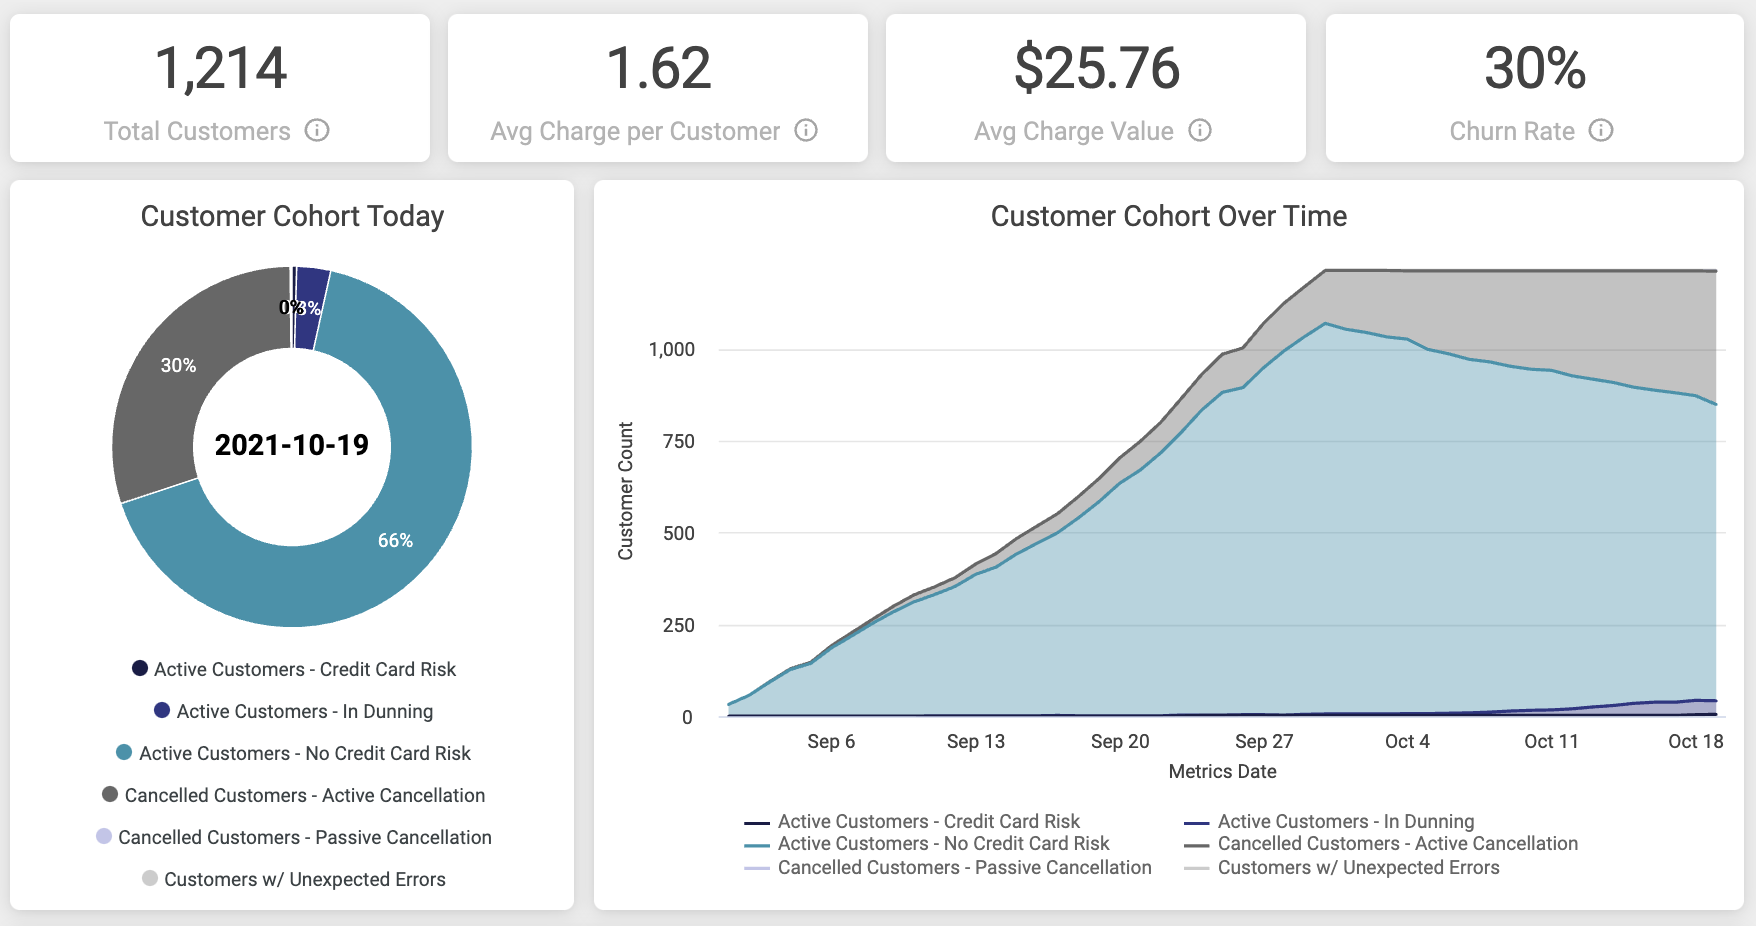 The Customer Cohort dasboard contains insights into your active customers and their average spending habits.